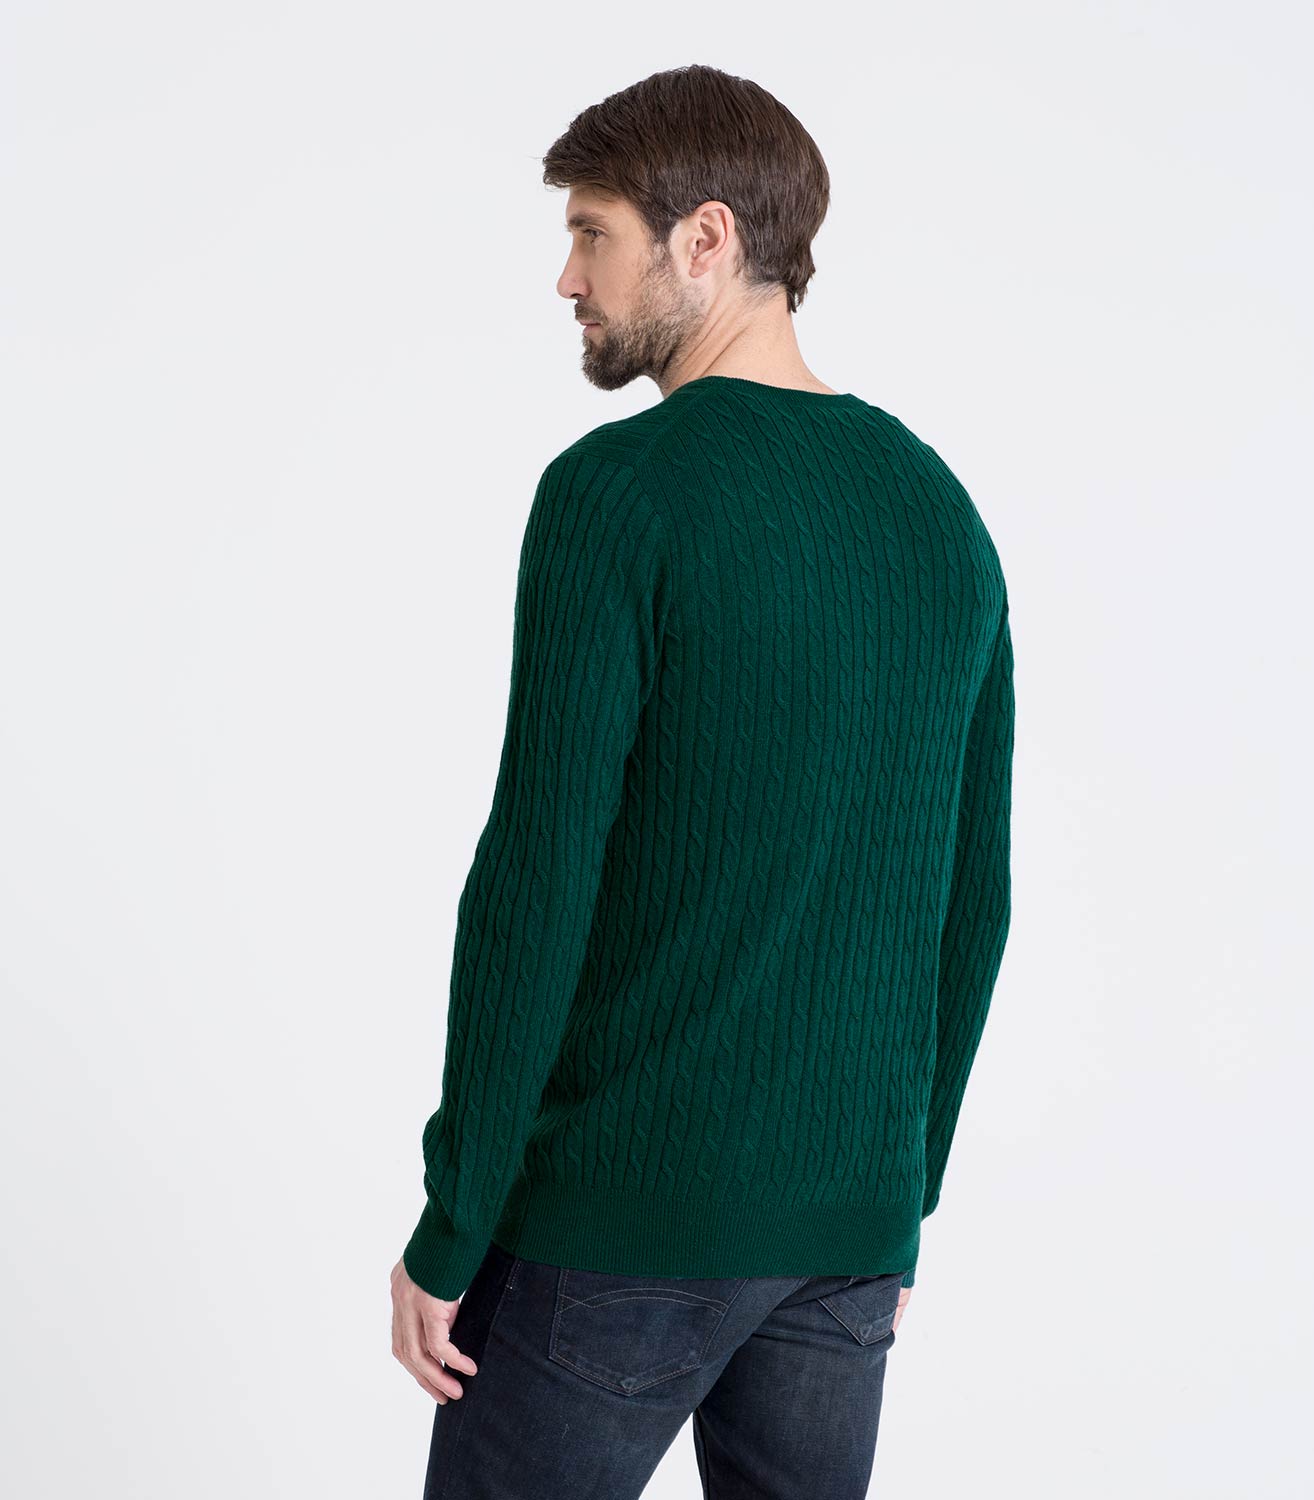 Bottle Green | Mens Cashmere & Merino Cable Crew Neck Jumper | WoolOvers UK